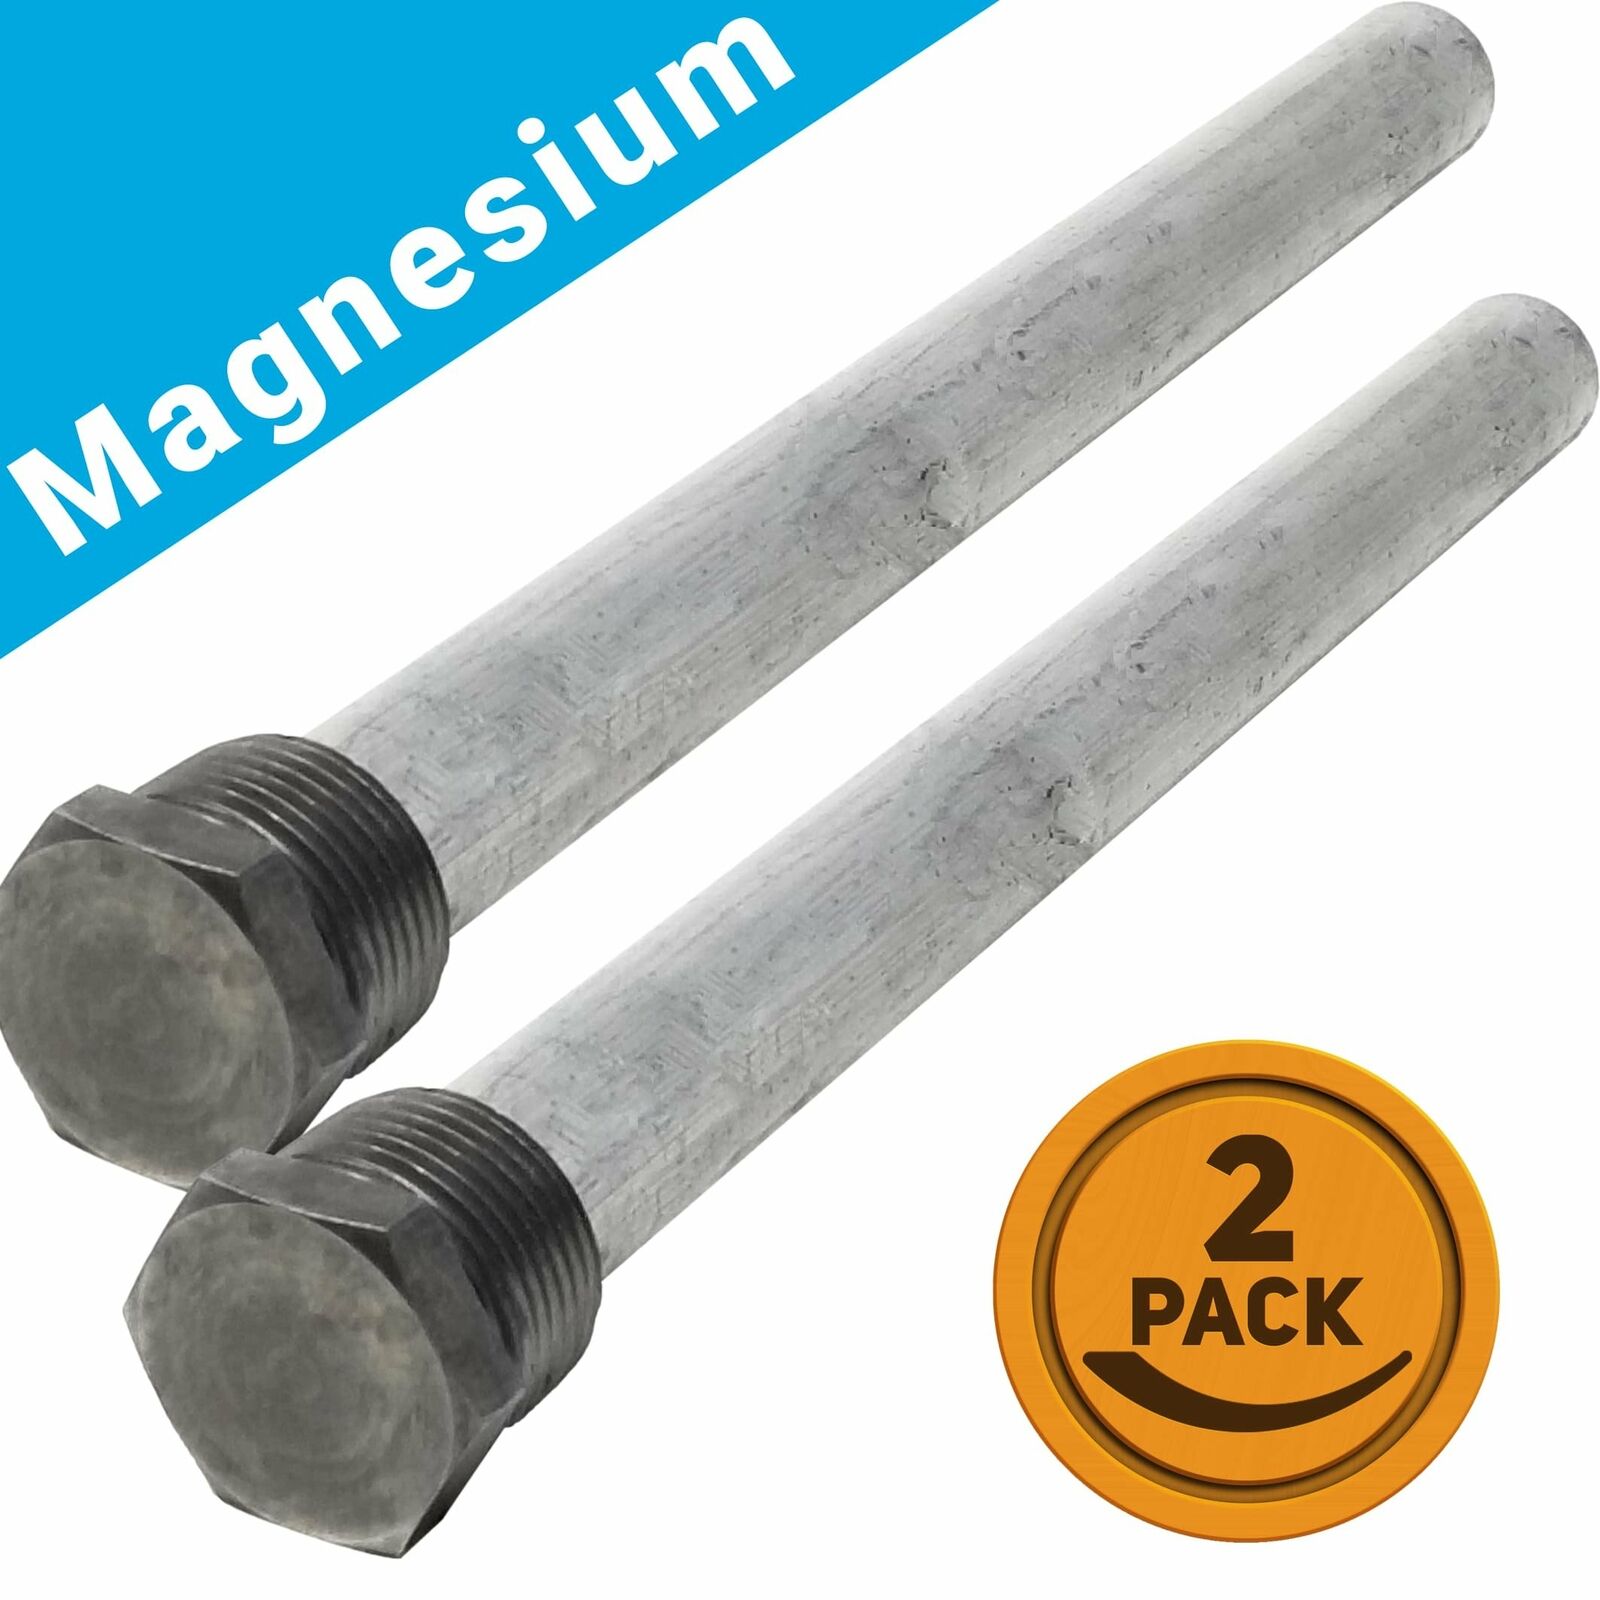 RV Water Heater Anode Rod Magnesium 2-Pack by Kelaro - Fits Suburban and...